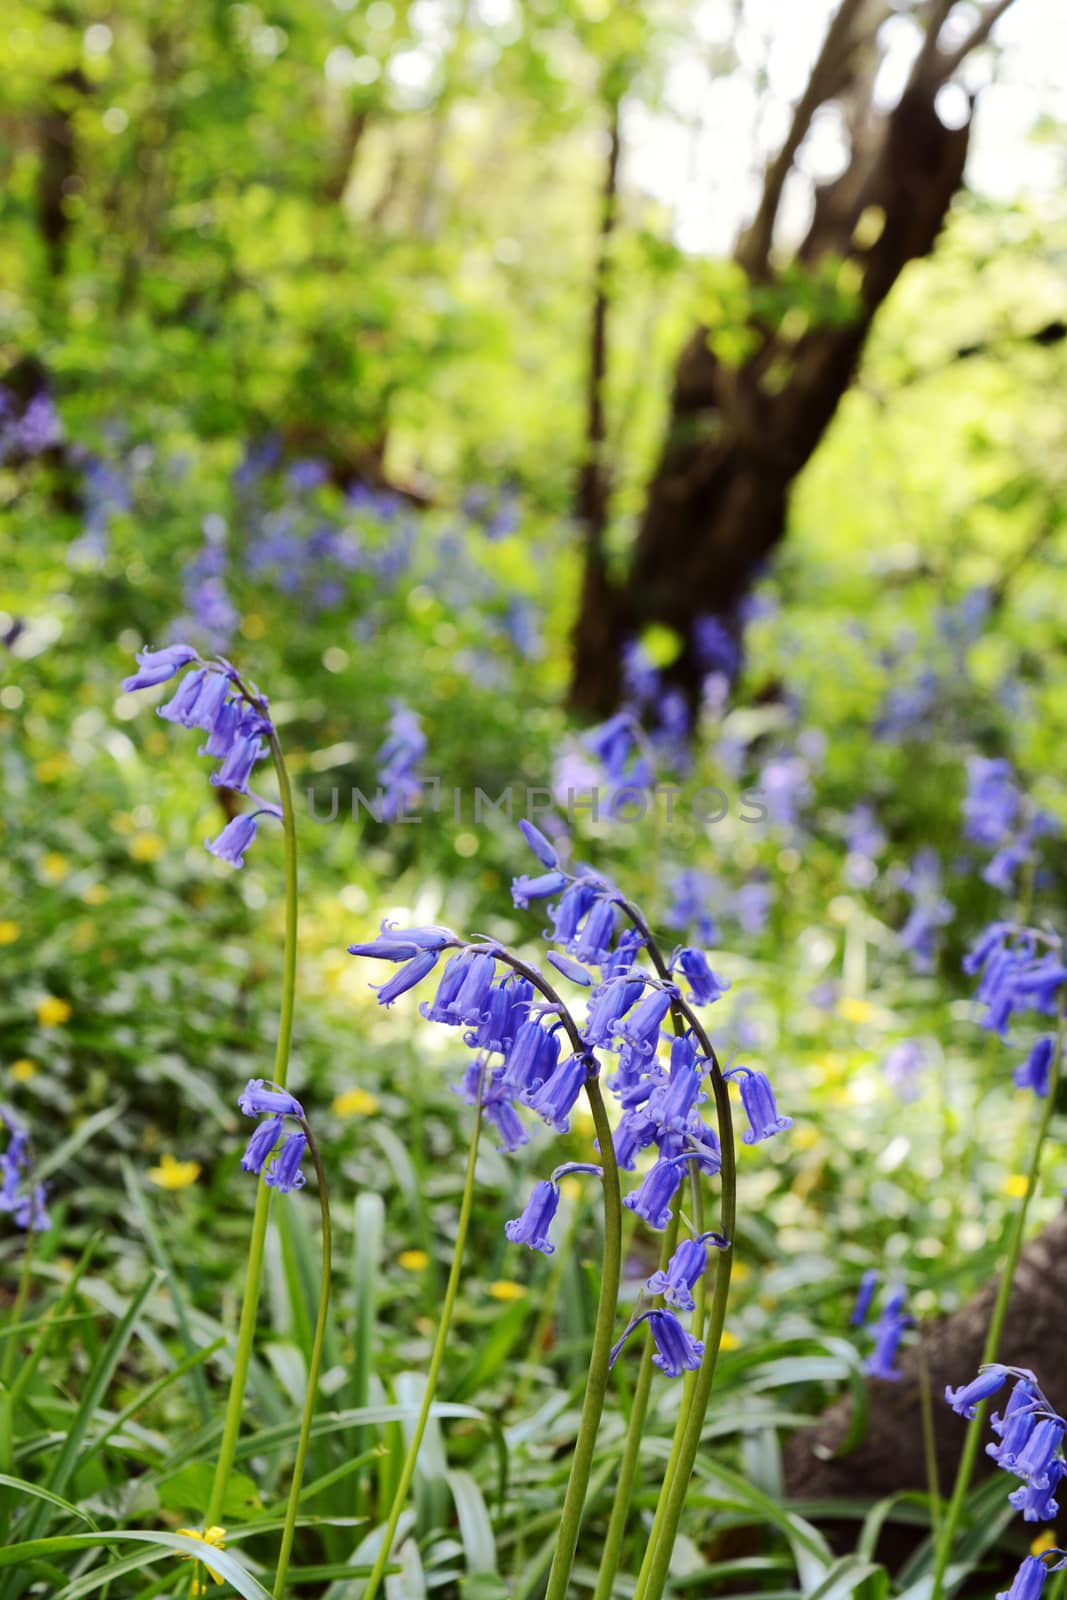 English bluebells on a bank of wild flowers by sarahdoow